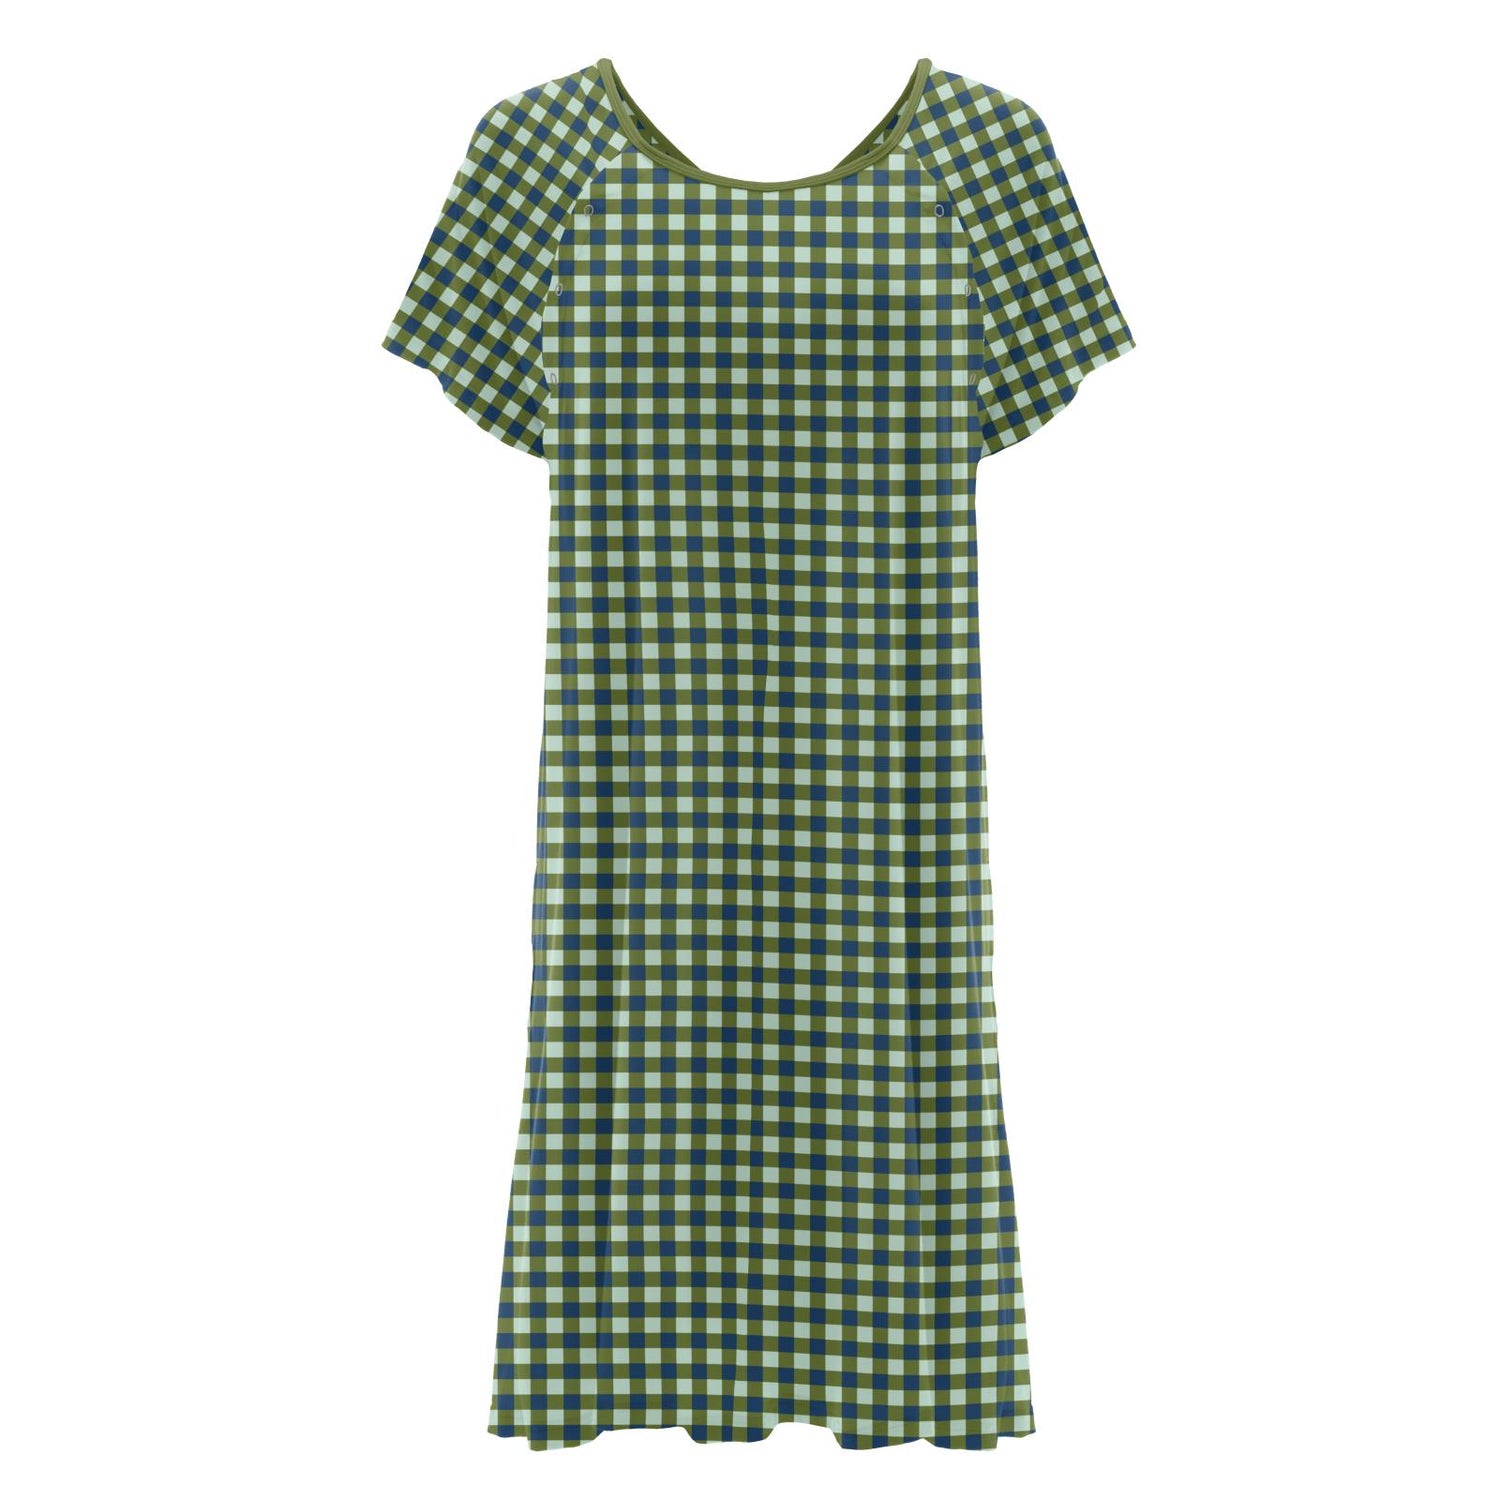 Women's Print Hospital Gown in Moss Gingham